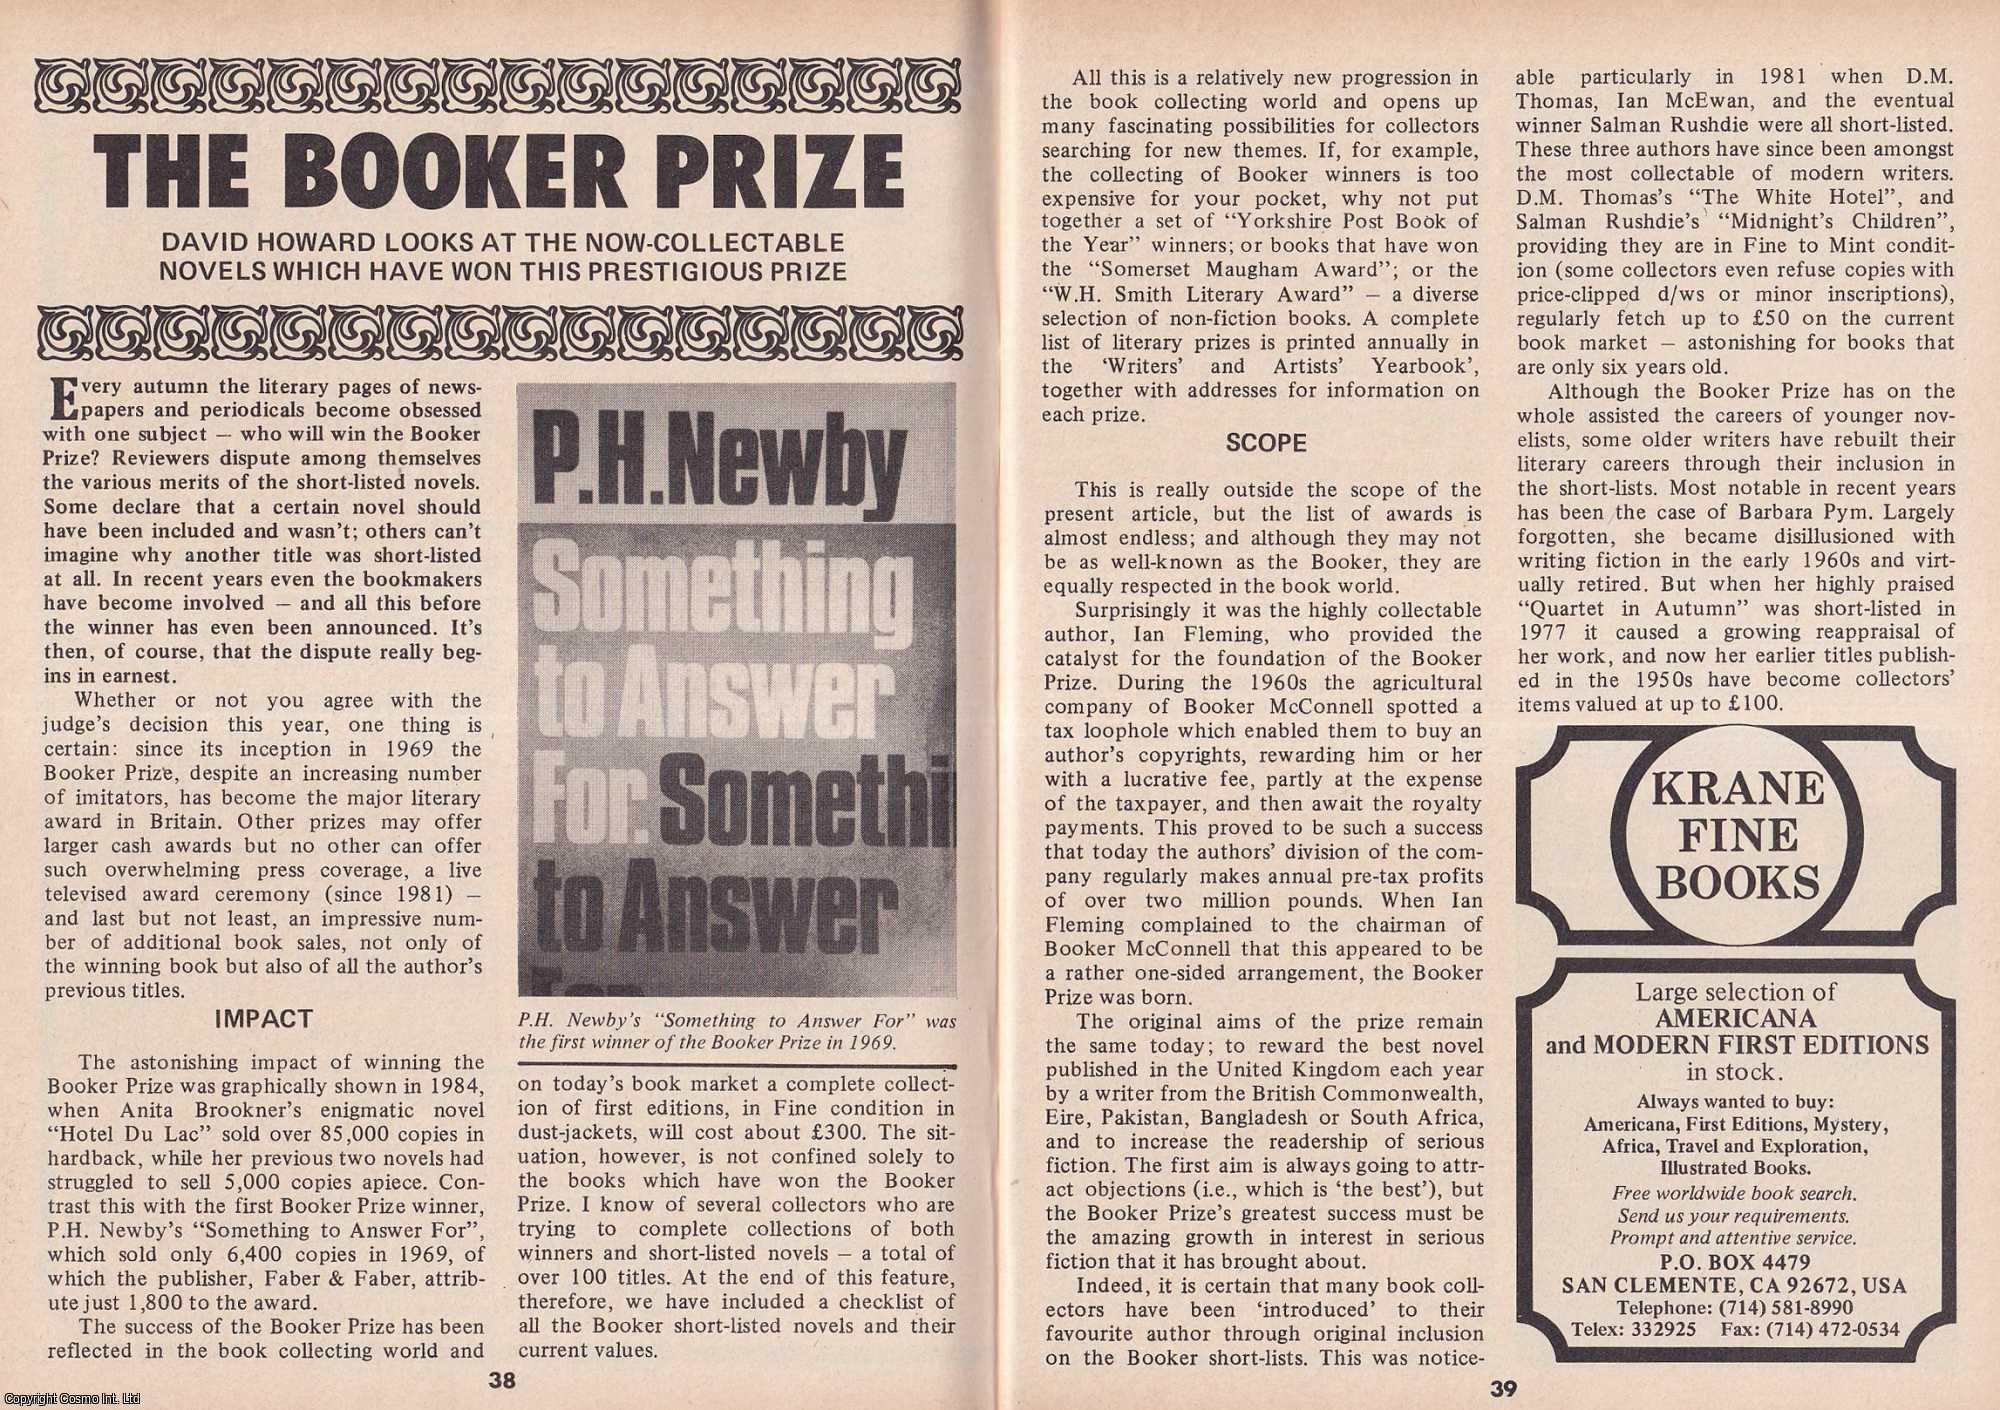 David Howard - The Booker Prize : Collectable Novels. This is an original article separated from an issue of The Book & Magazine Collector publication, 1988.